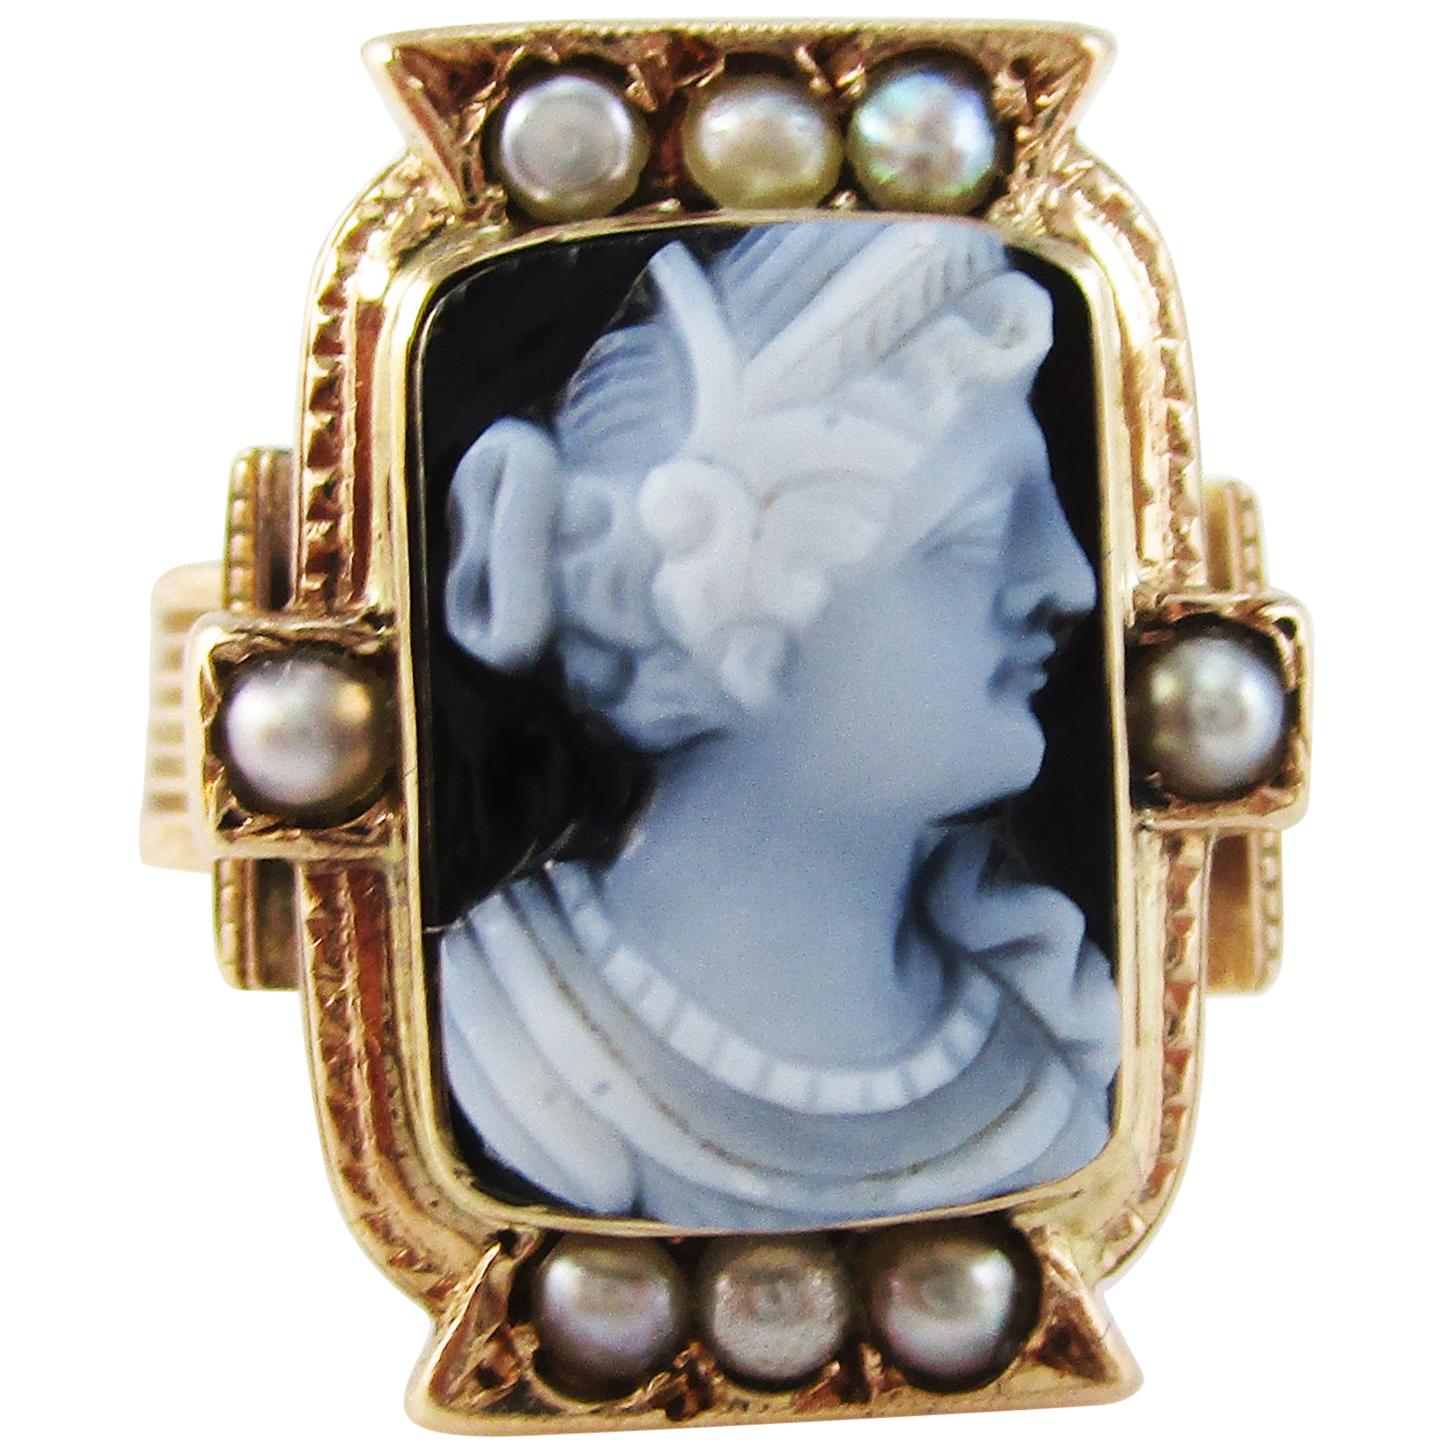 1870 Victorian 14 Karat Rose Gold Agate Cameo Band Ring with Pearl Border